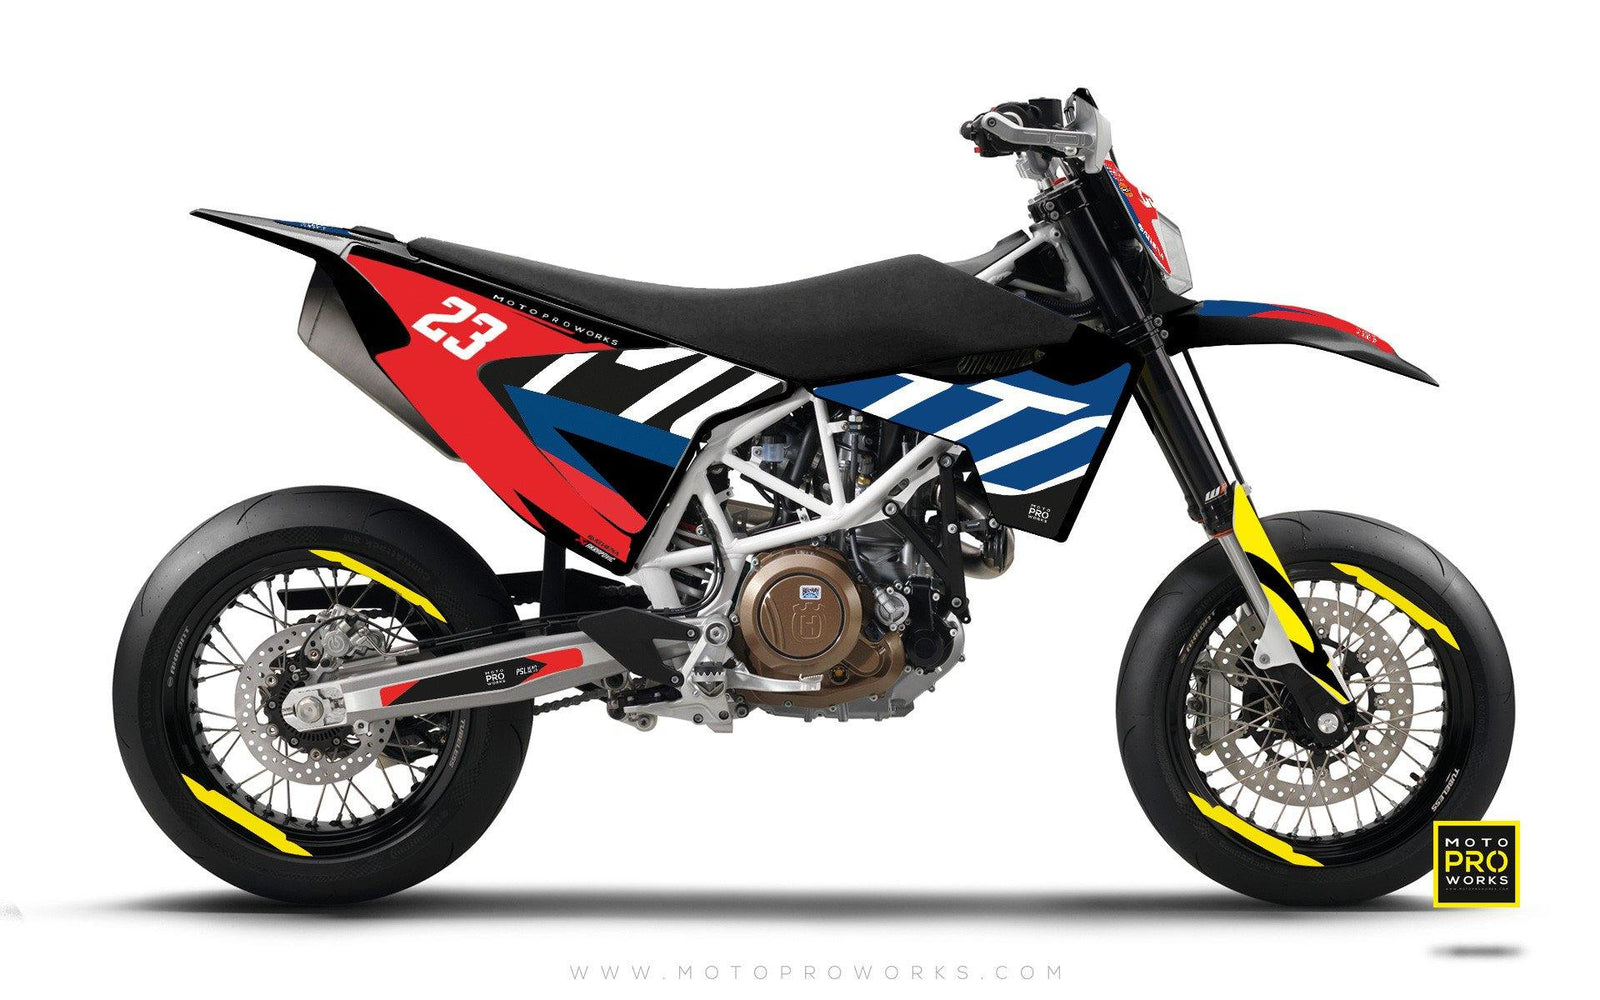 Turismo inundar Maestro KTM GRAPHICS - "APEX" (classic) - MotoProWorks | Decals and Bike Graphic kit